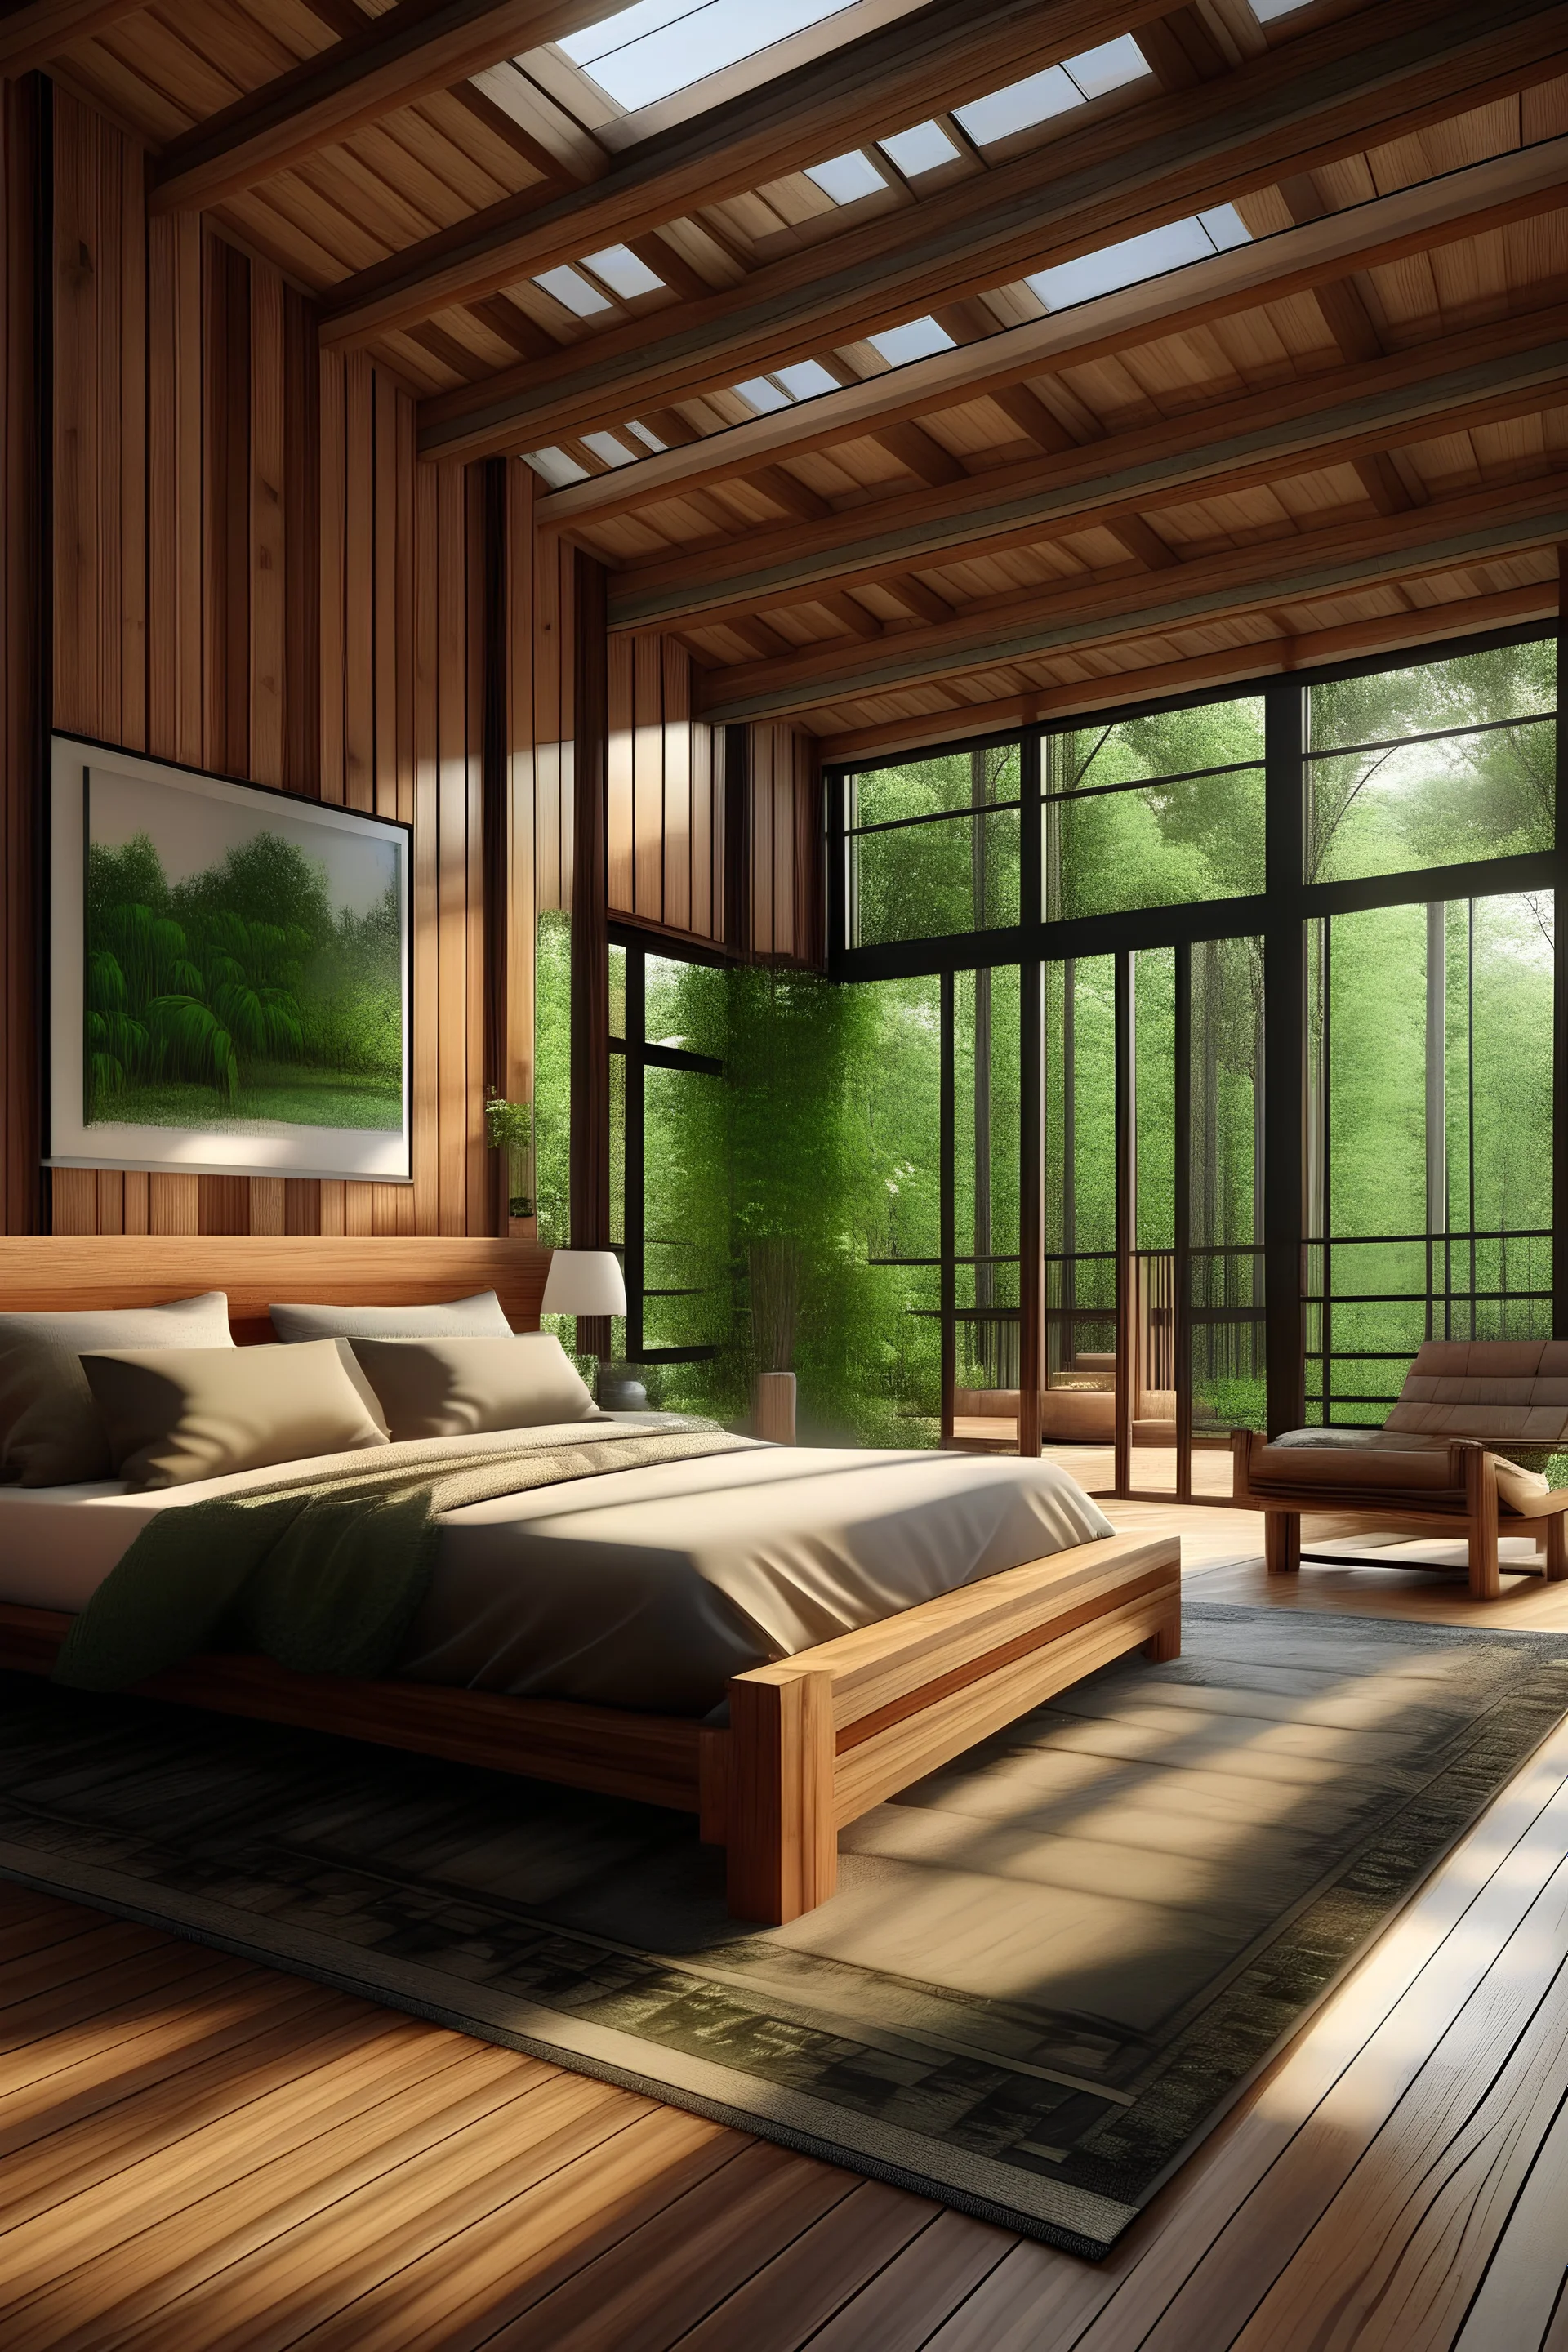 Generate a big master bedroom Made out of wood, vegetation, big windows and space.